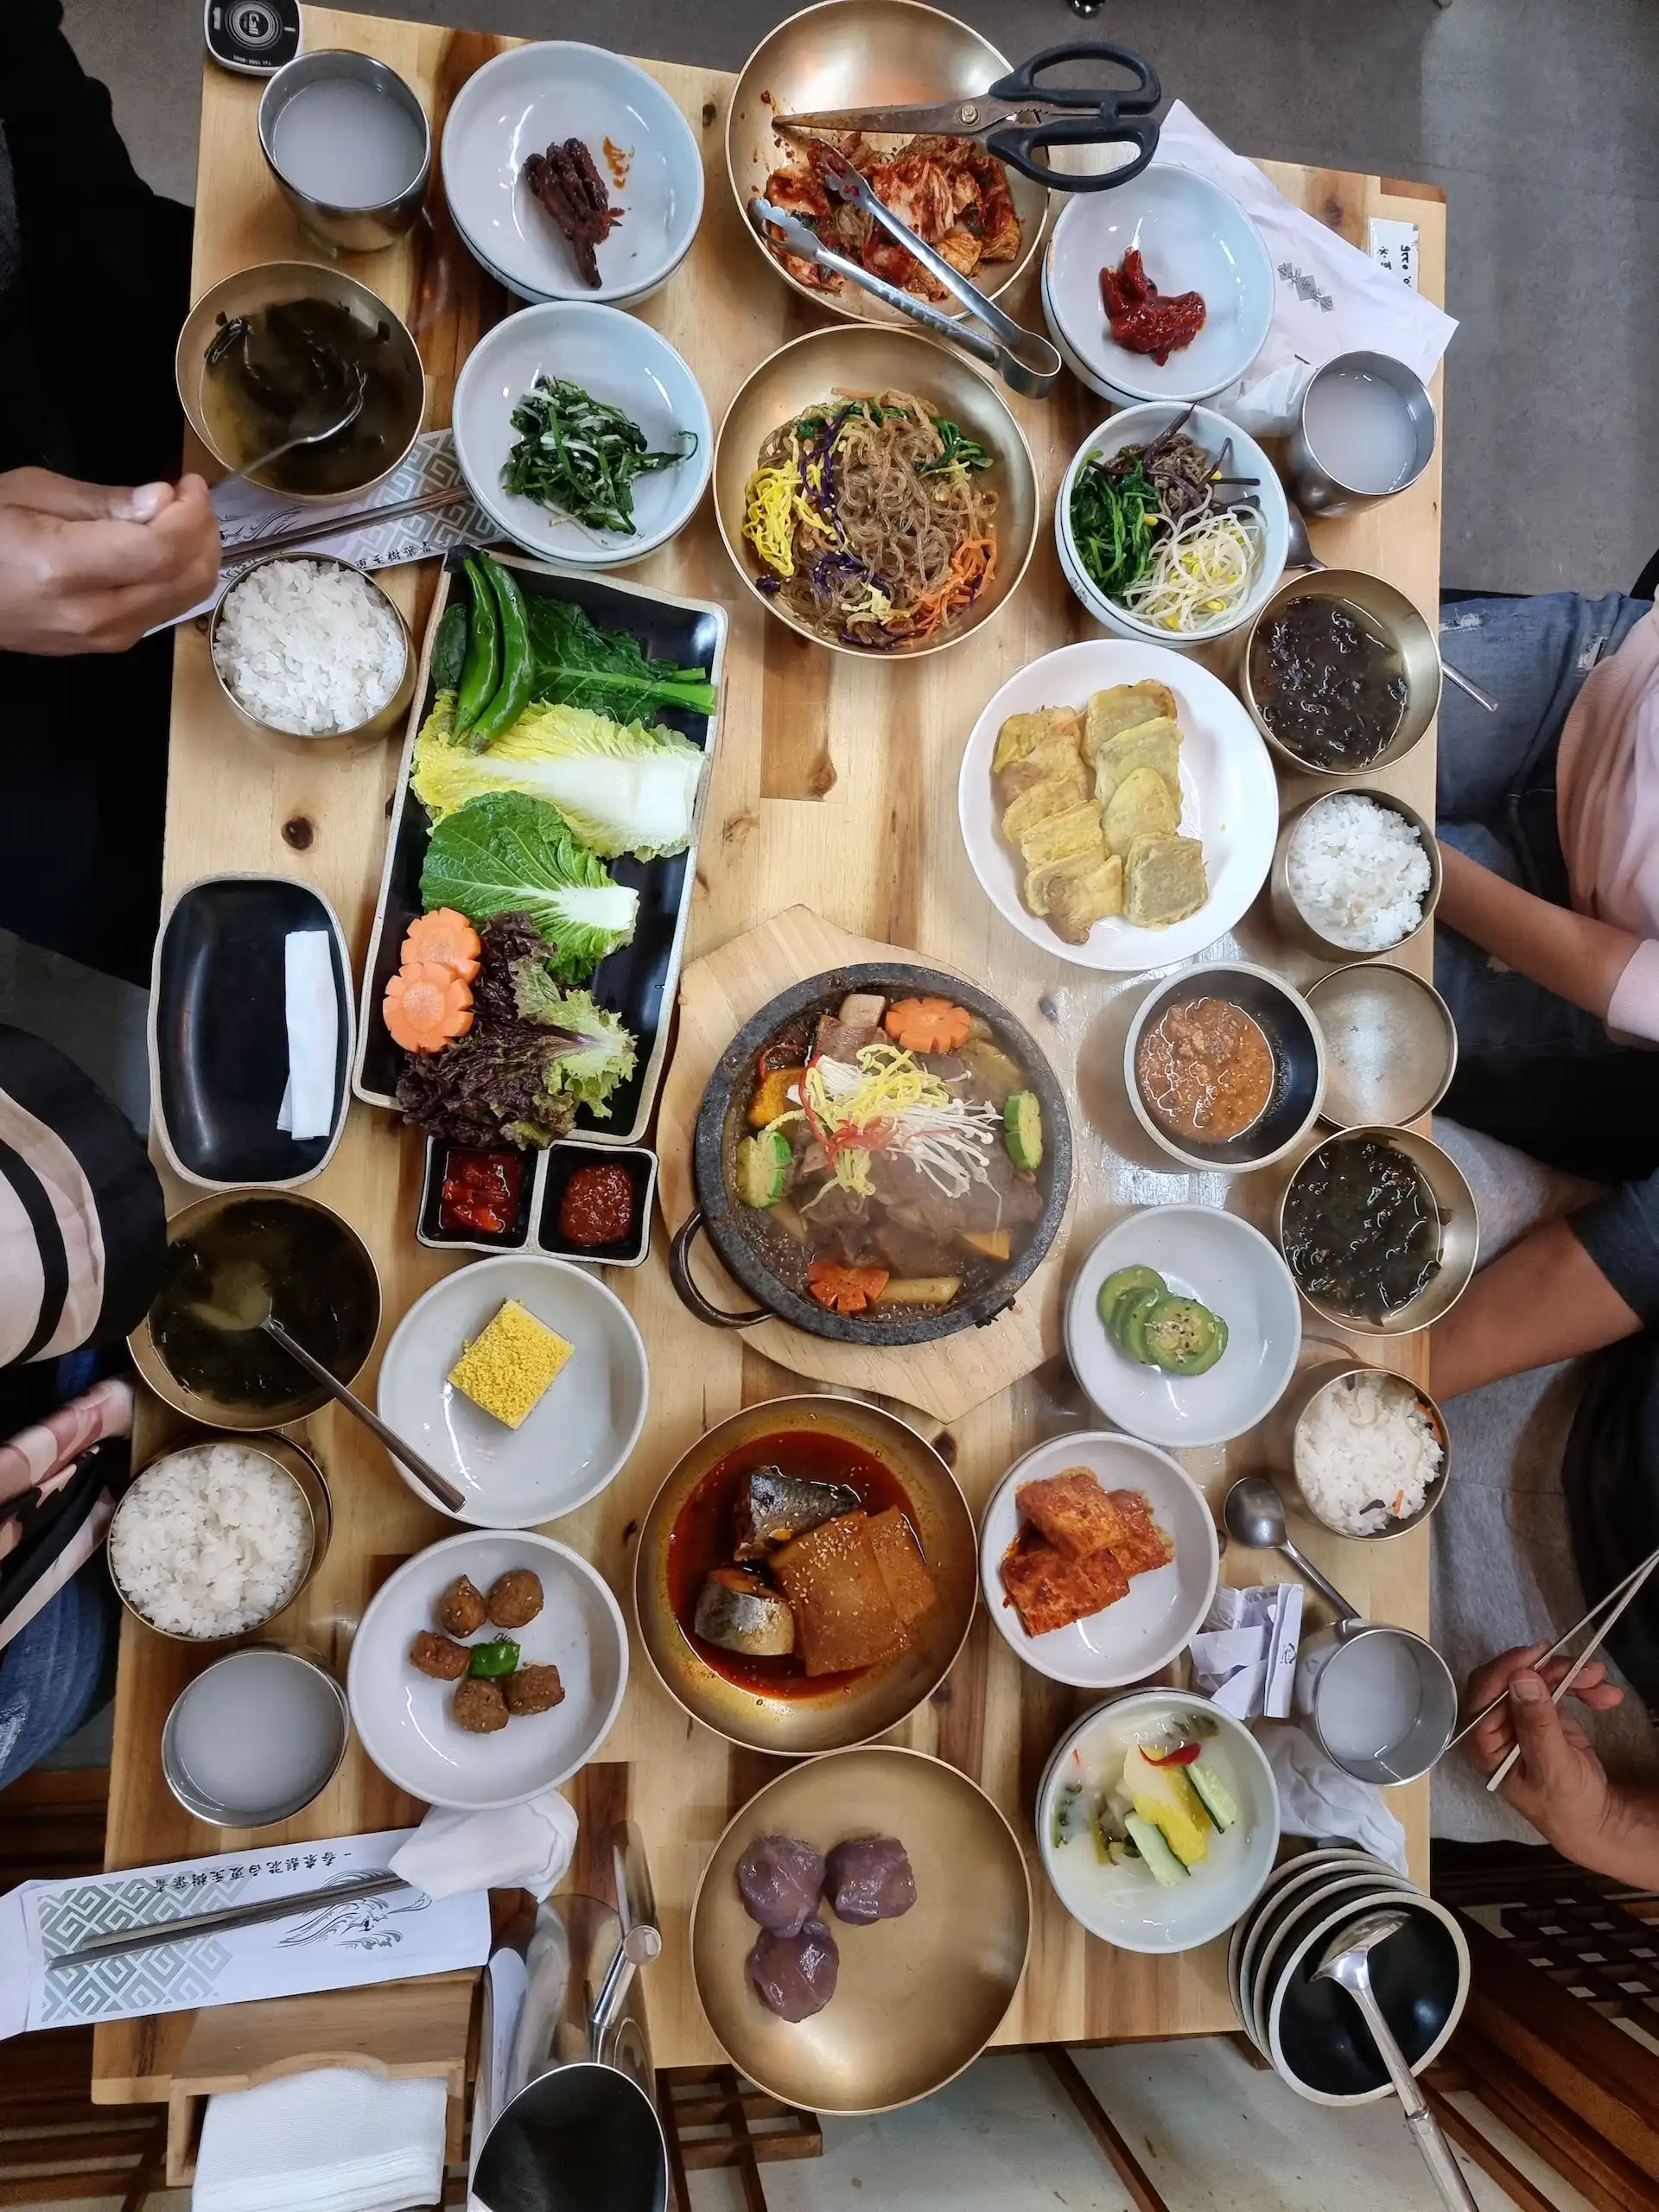 Group eating in South Korea